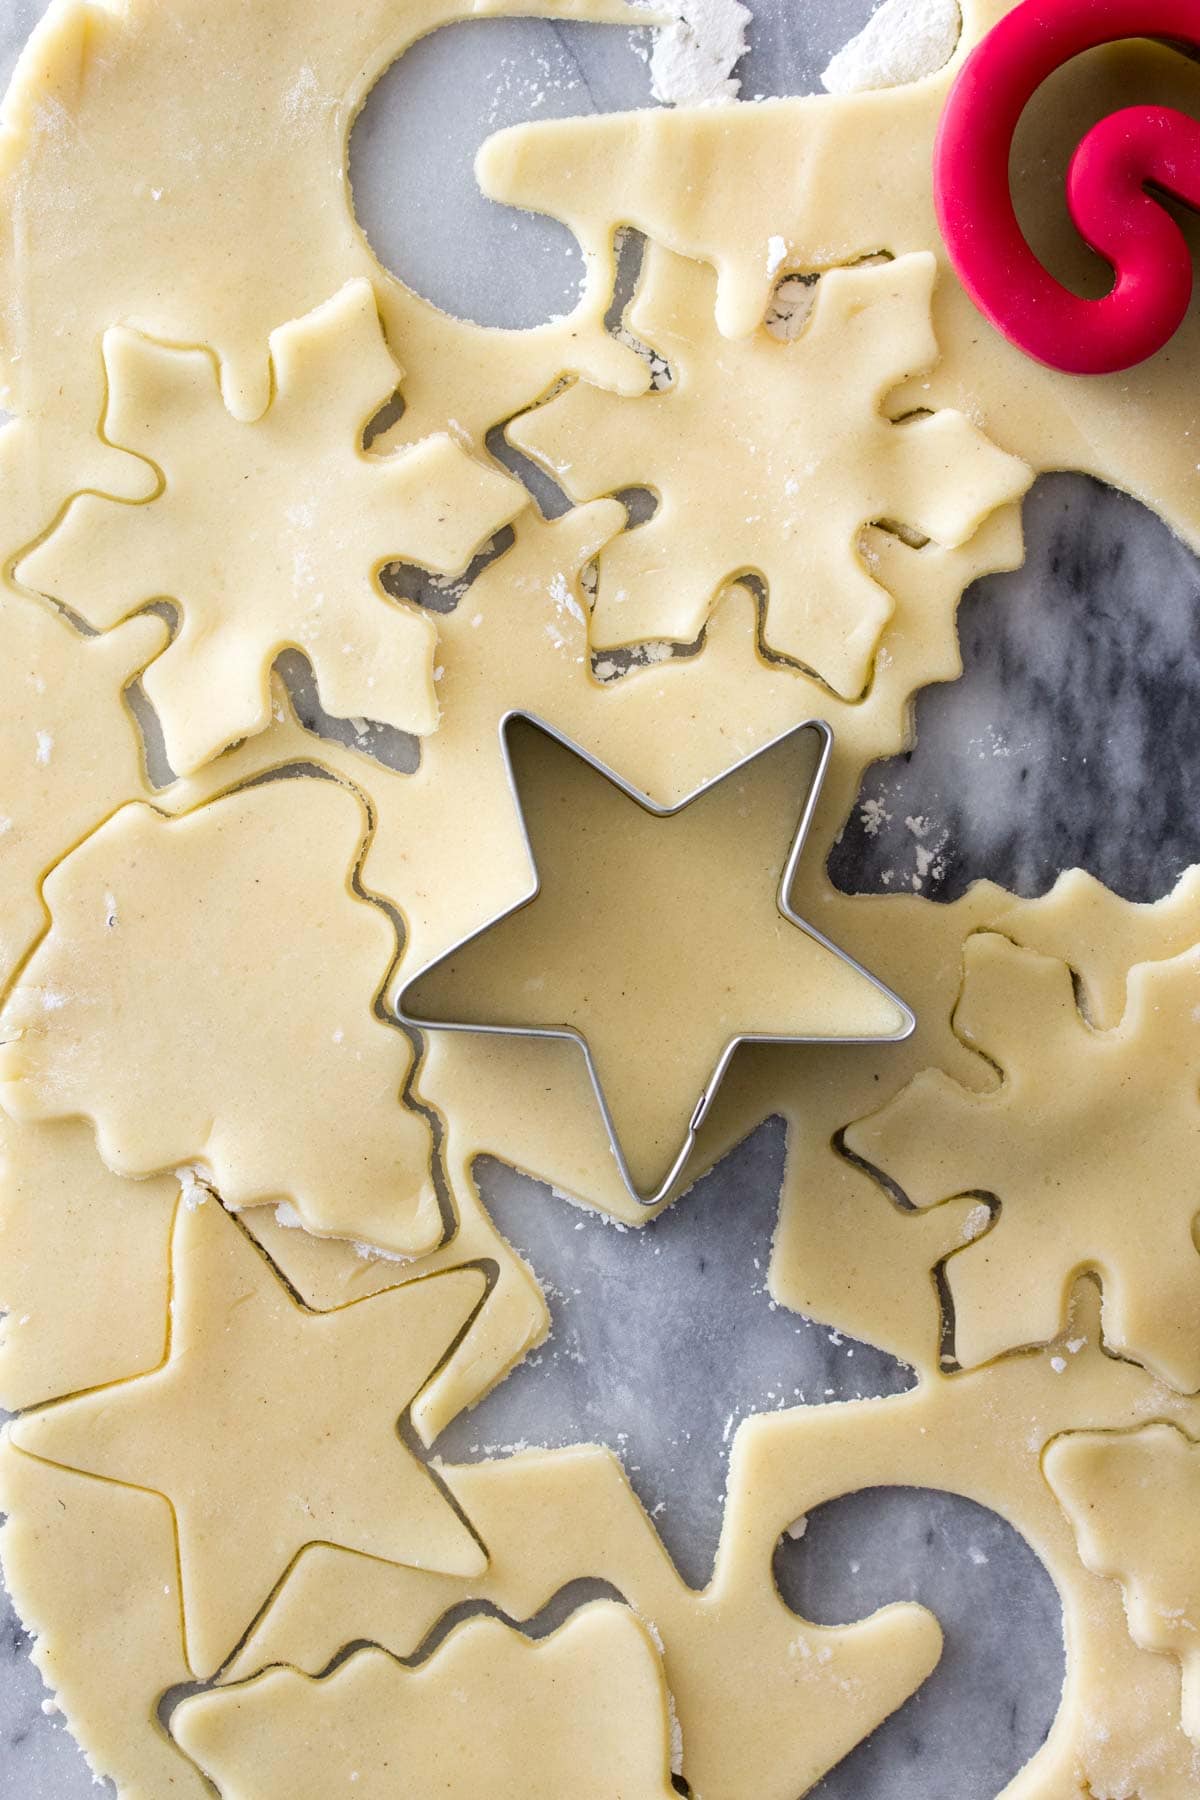 Sugar cookie recipe dough being cut into festive shapes with cookie cutter